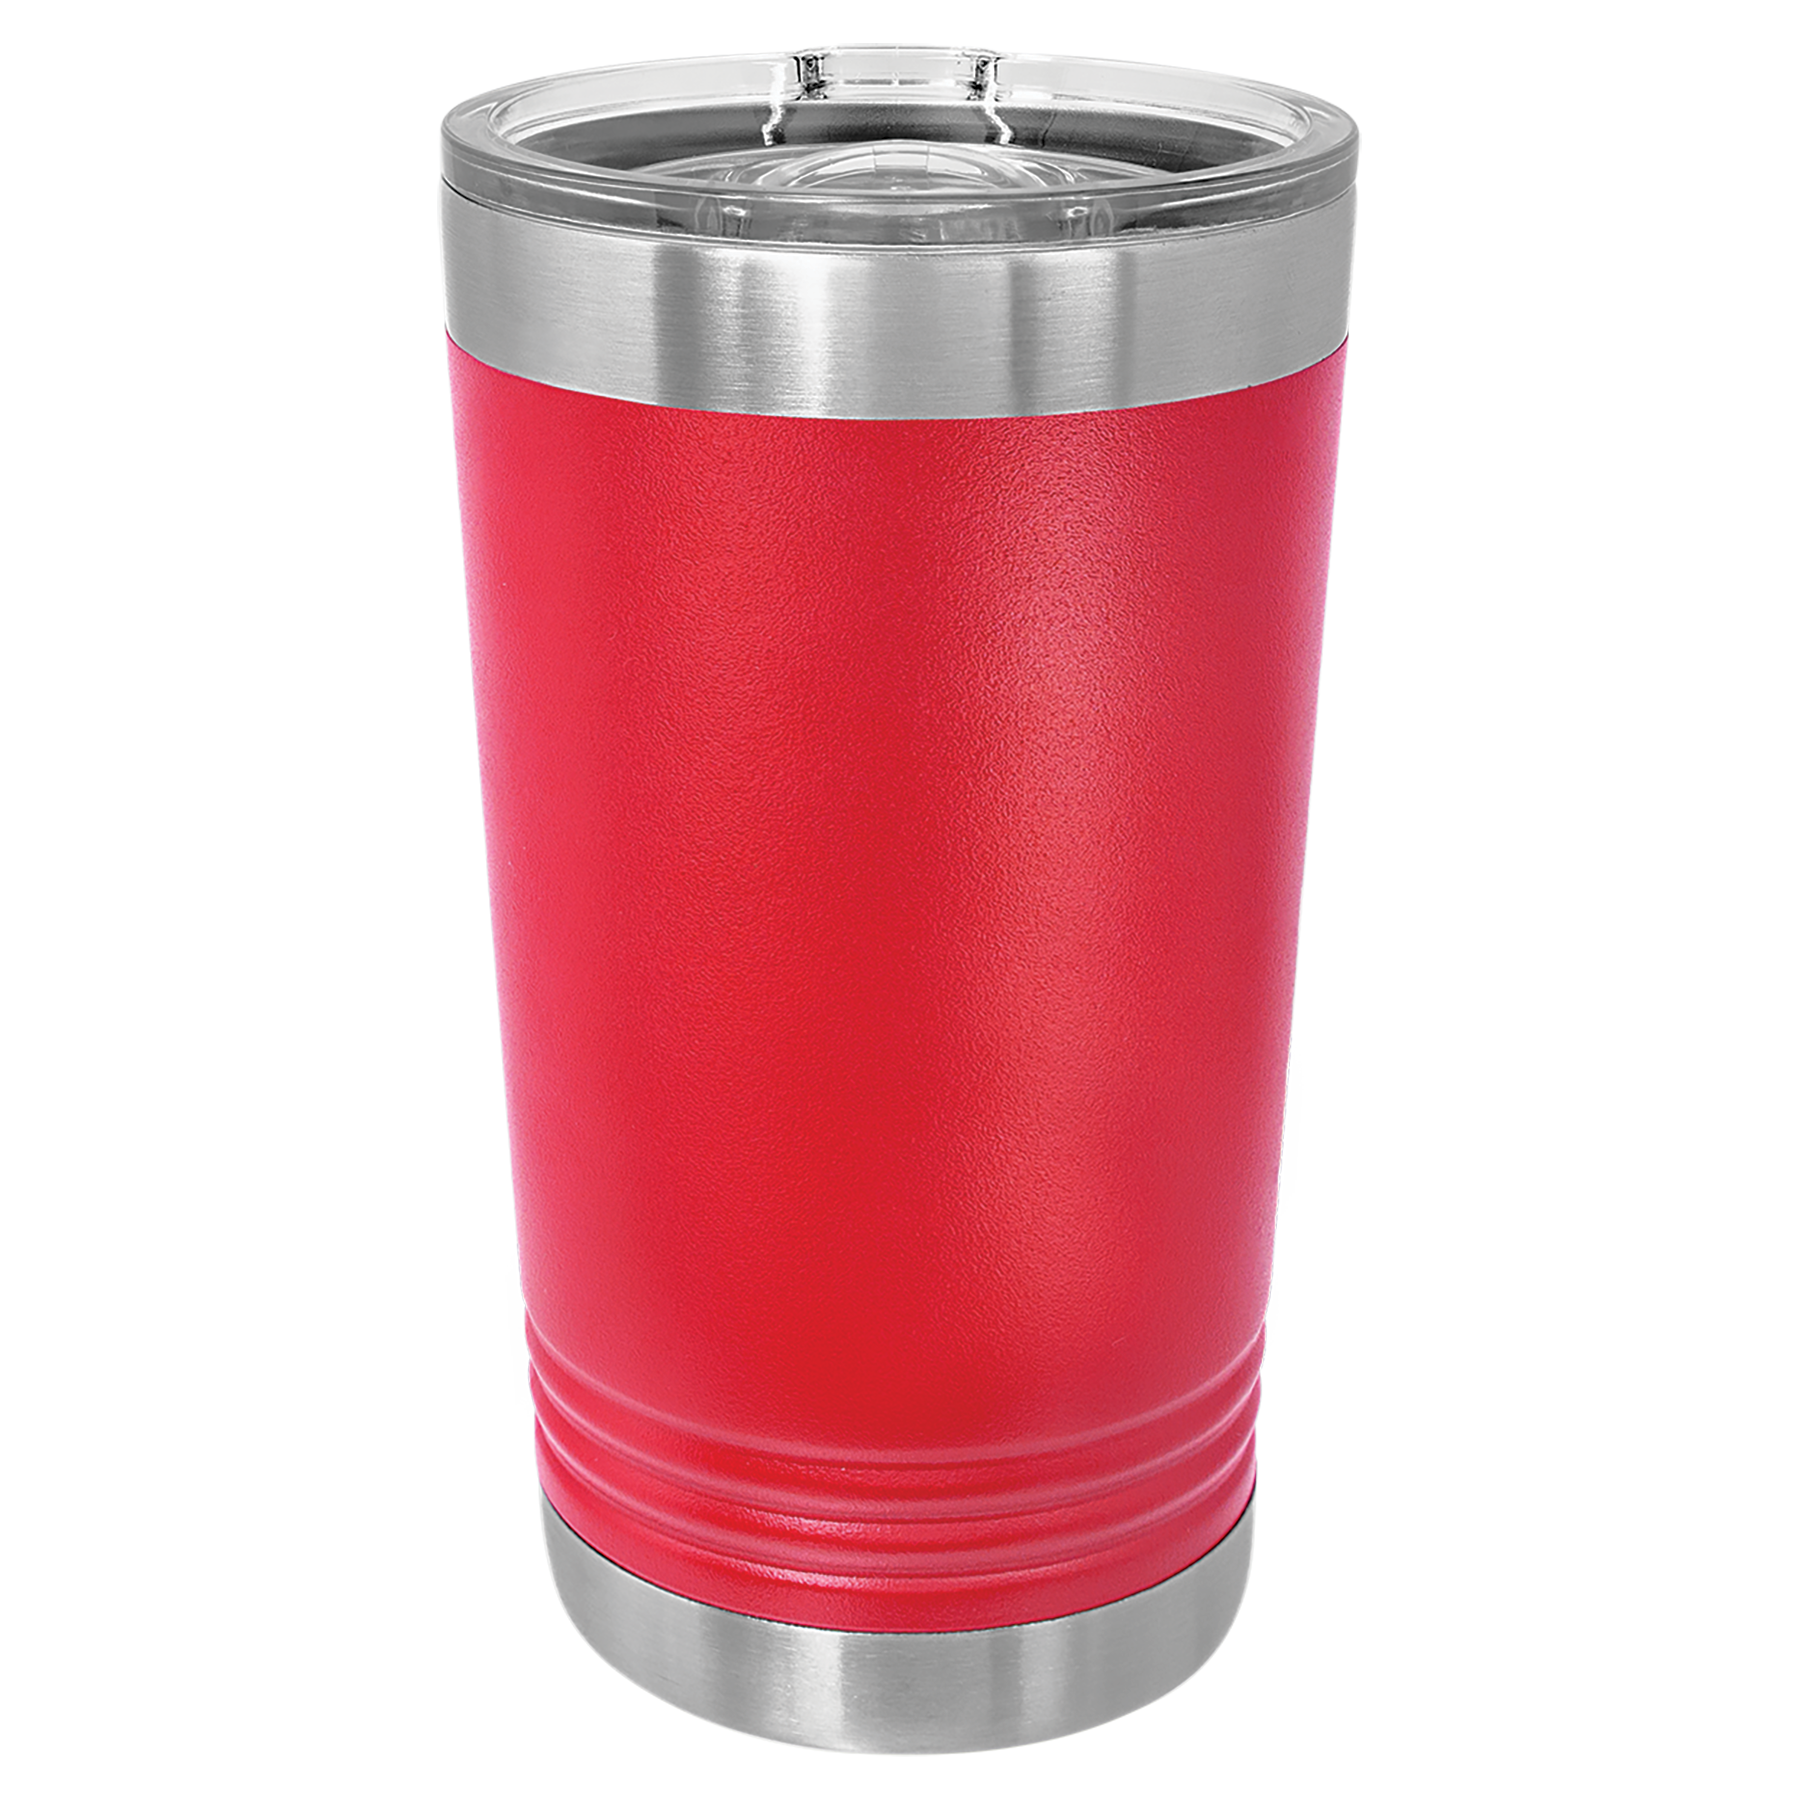 Red 16oz Pint Tumbler -One Free Engraving  -Fits most Cup Holders  -Double-wall Vacuum Insulated  -Made from 18/8 Gauge Stainless Steel (Type 304 Food Grade)  -Lid is BPA Free (Hand Wash Only)  -Not recommended for Dishwasher  -Works with Cold and Hot Drinks  -18 Color Options  -Perfect for Personalized Gifts, Awards, In